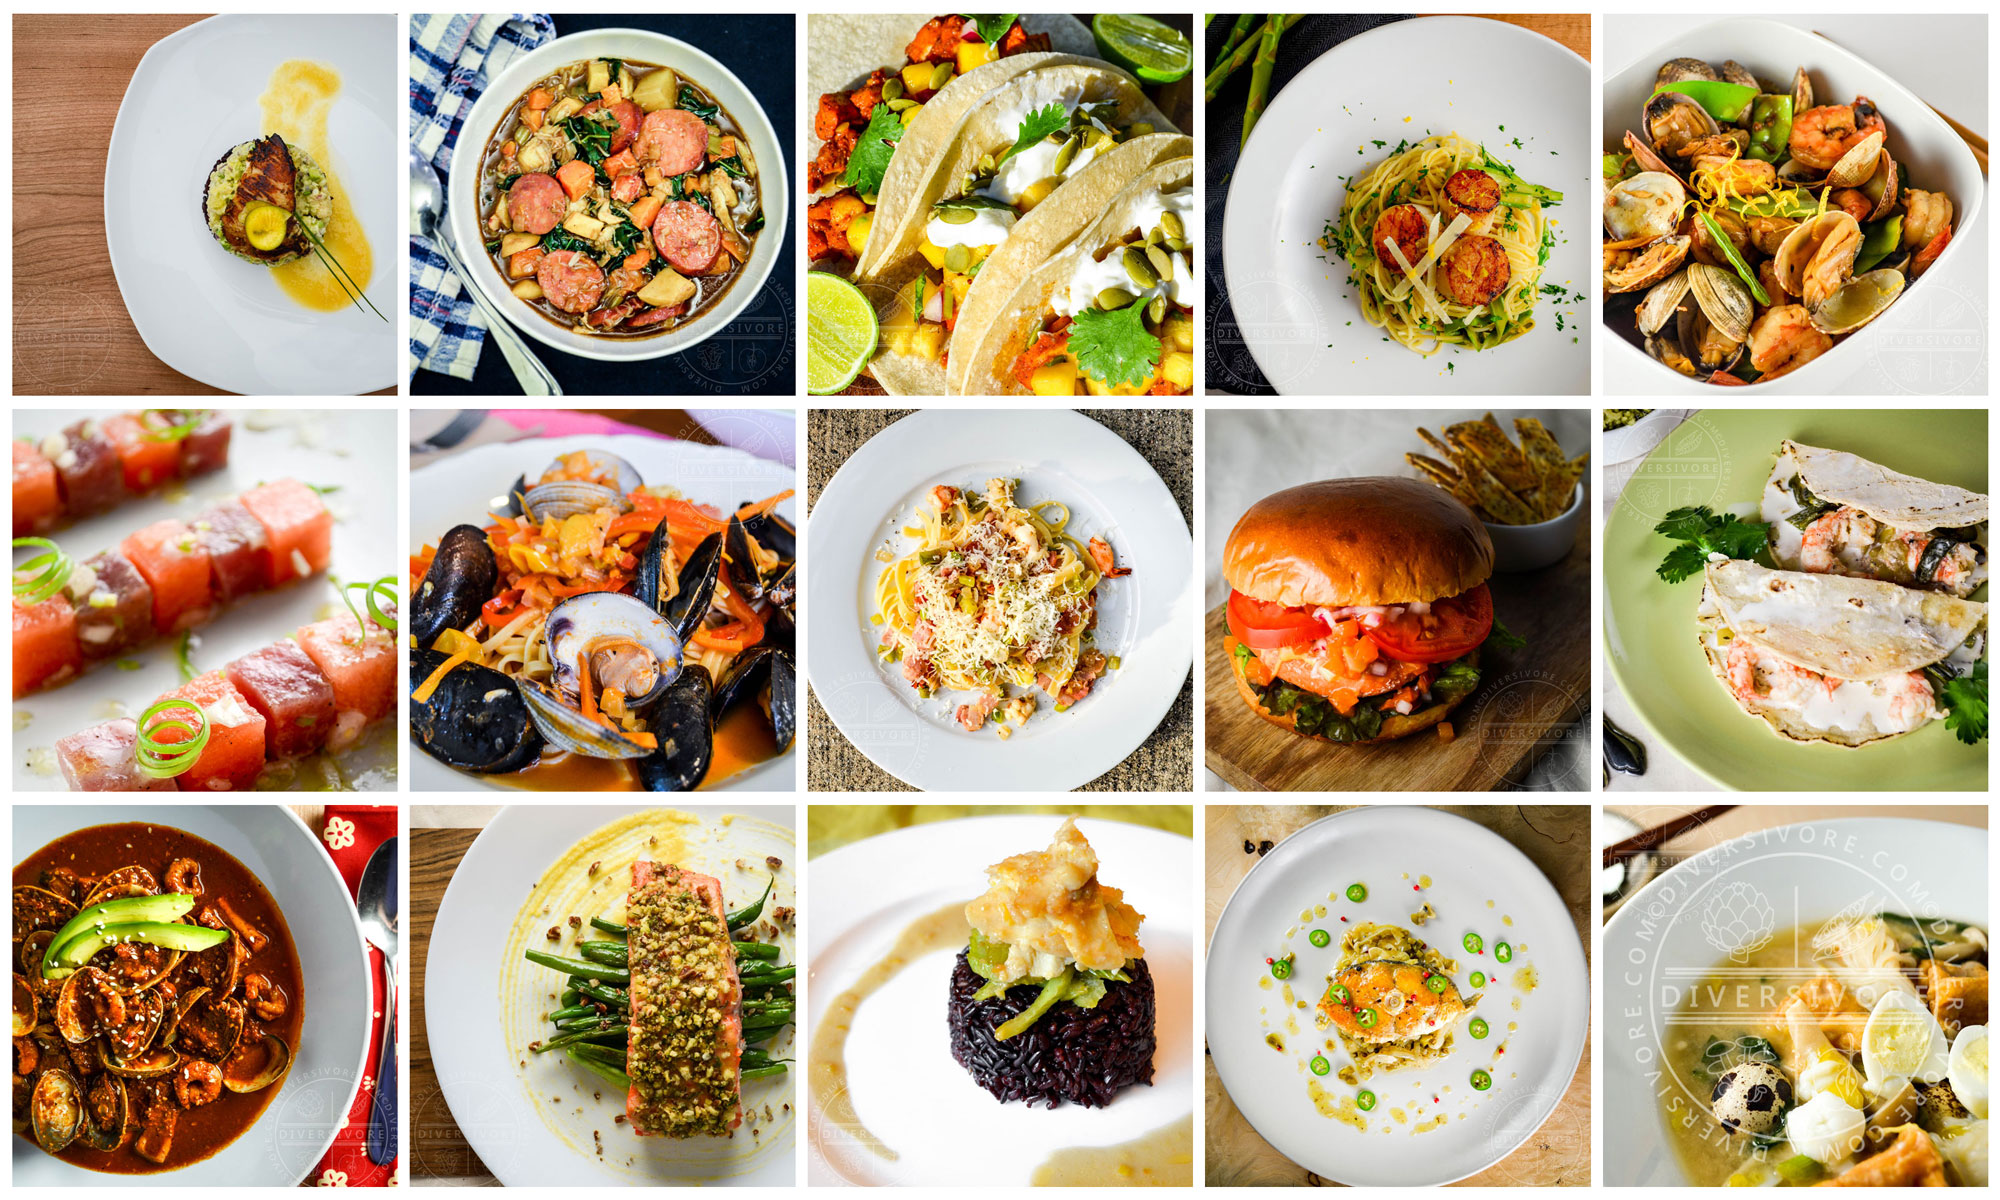 A collage of recipes from Diversivore.com featuring sustainable seafood.